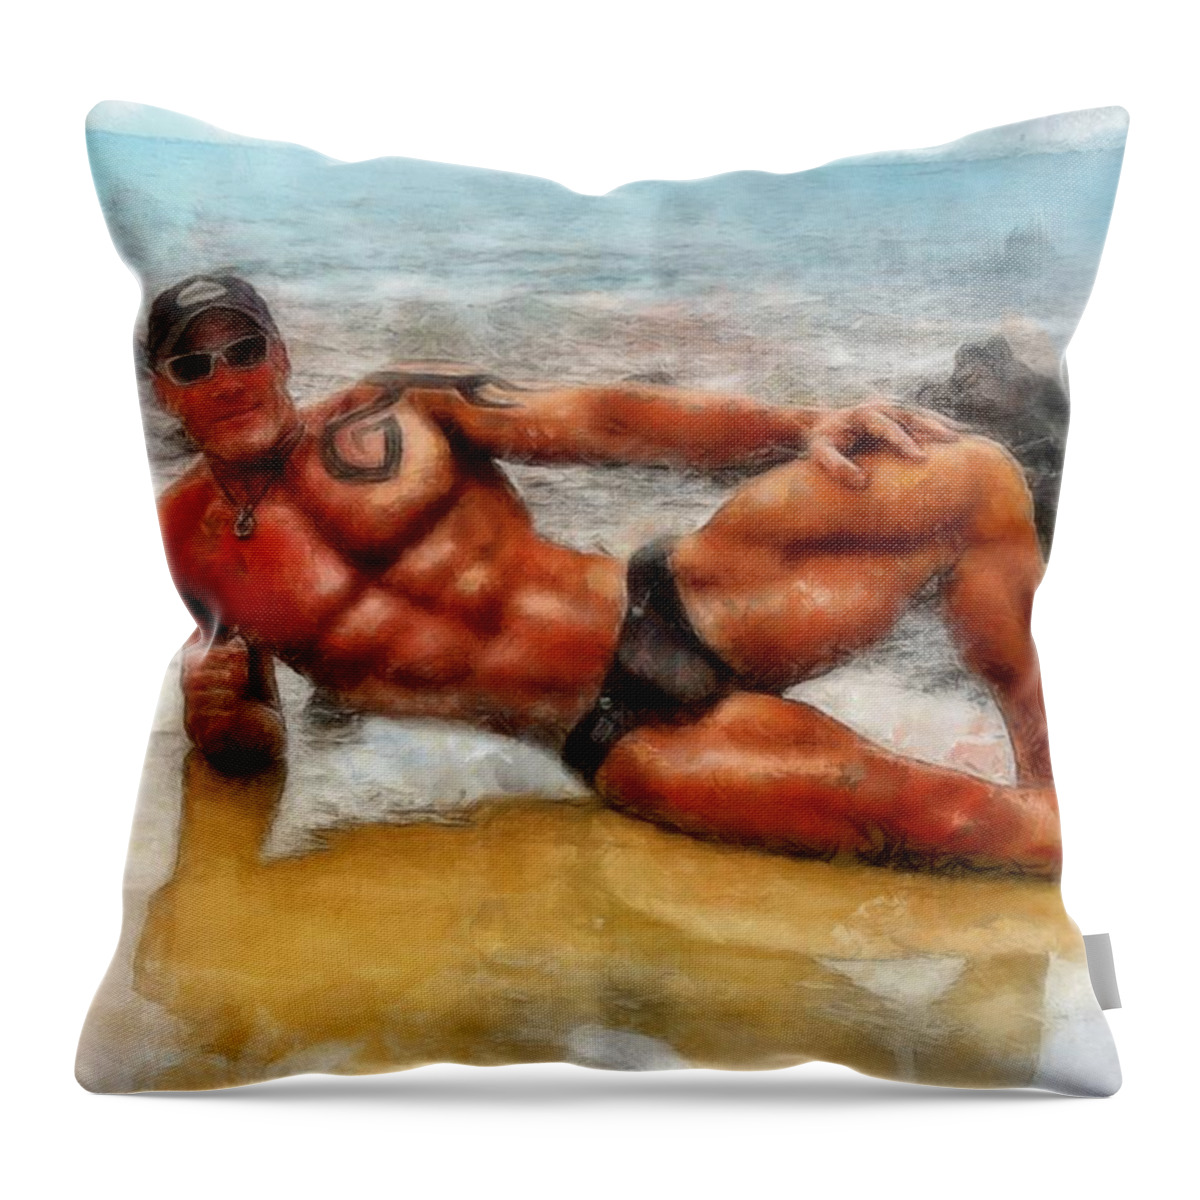 Jim Throw Pillow featuring the digital art Pin Up by Bombelkie - Marcin and Dawid Witukiewicz